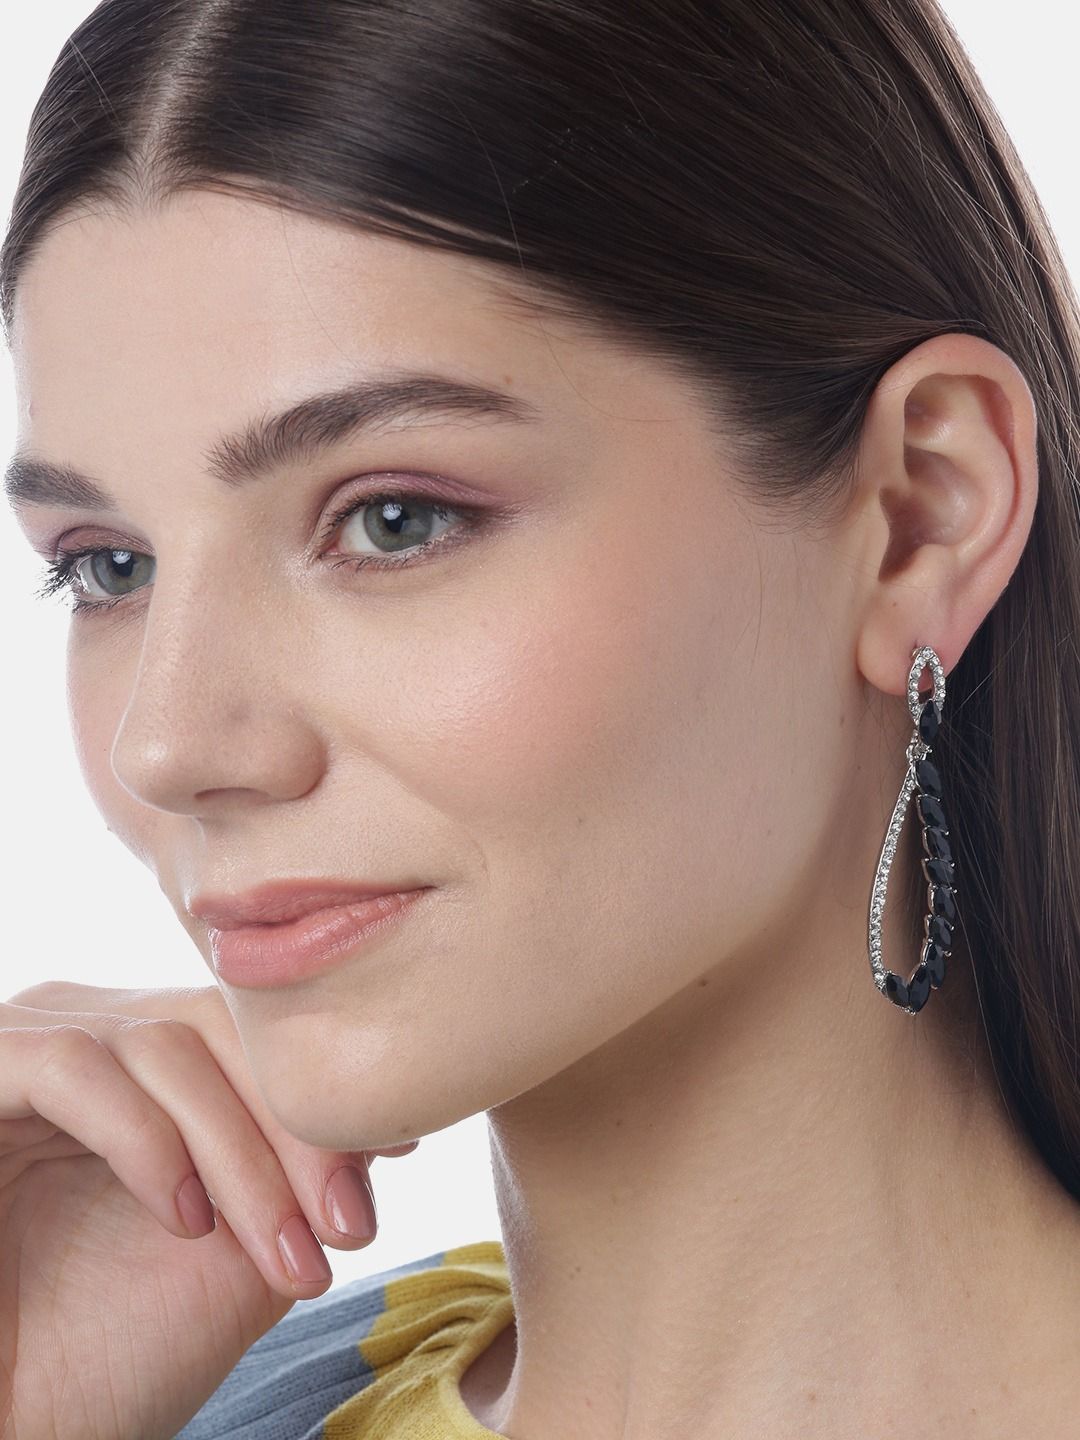 10,000+ Amazon Shoppers Have Bought These Teardrop Earrings in a Month